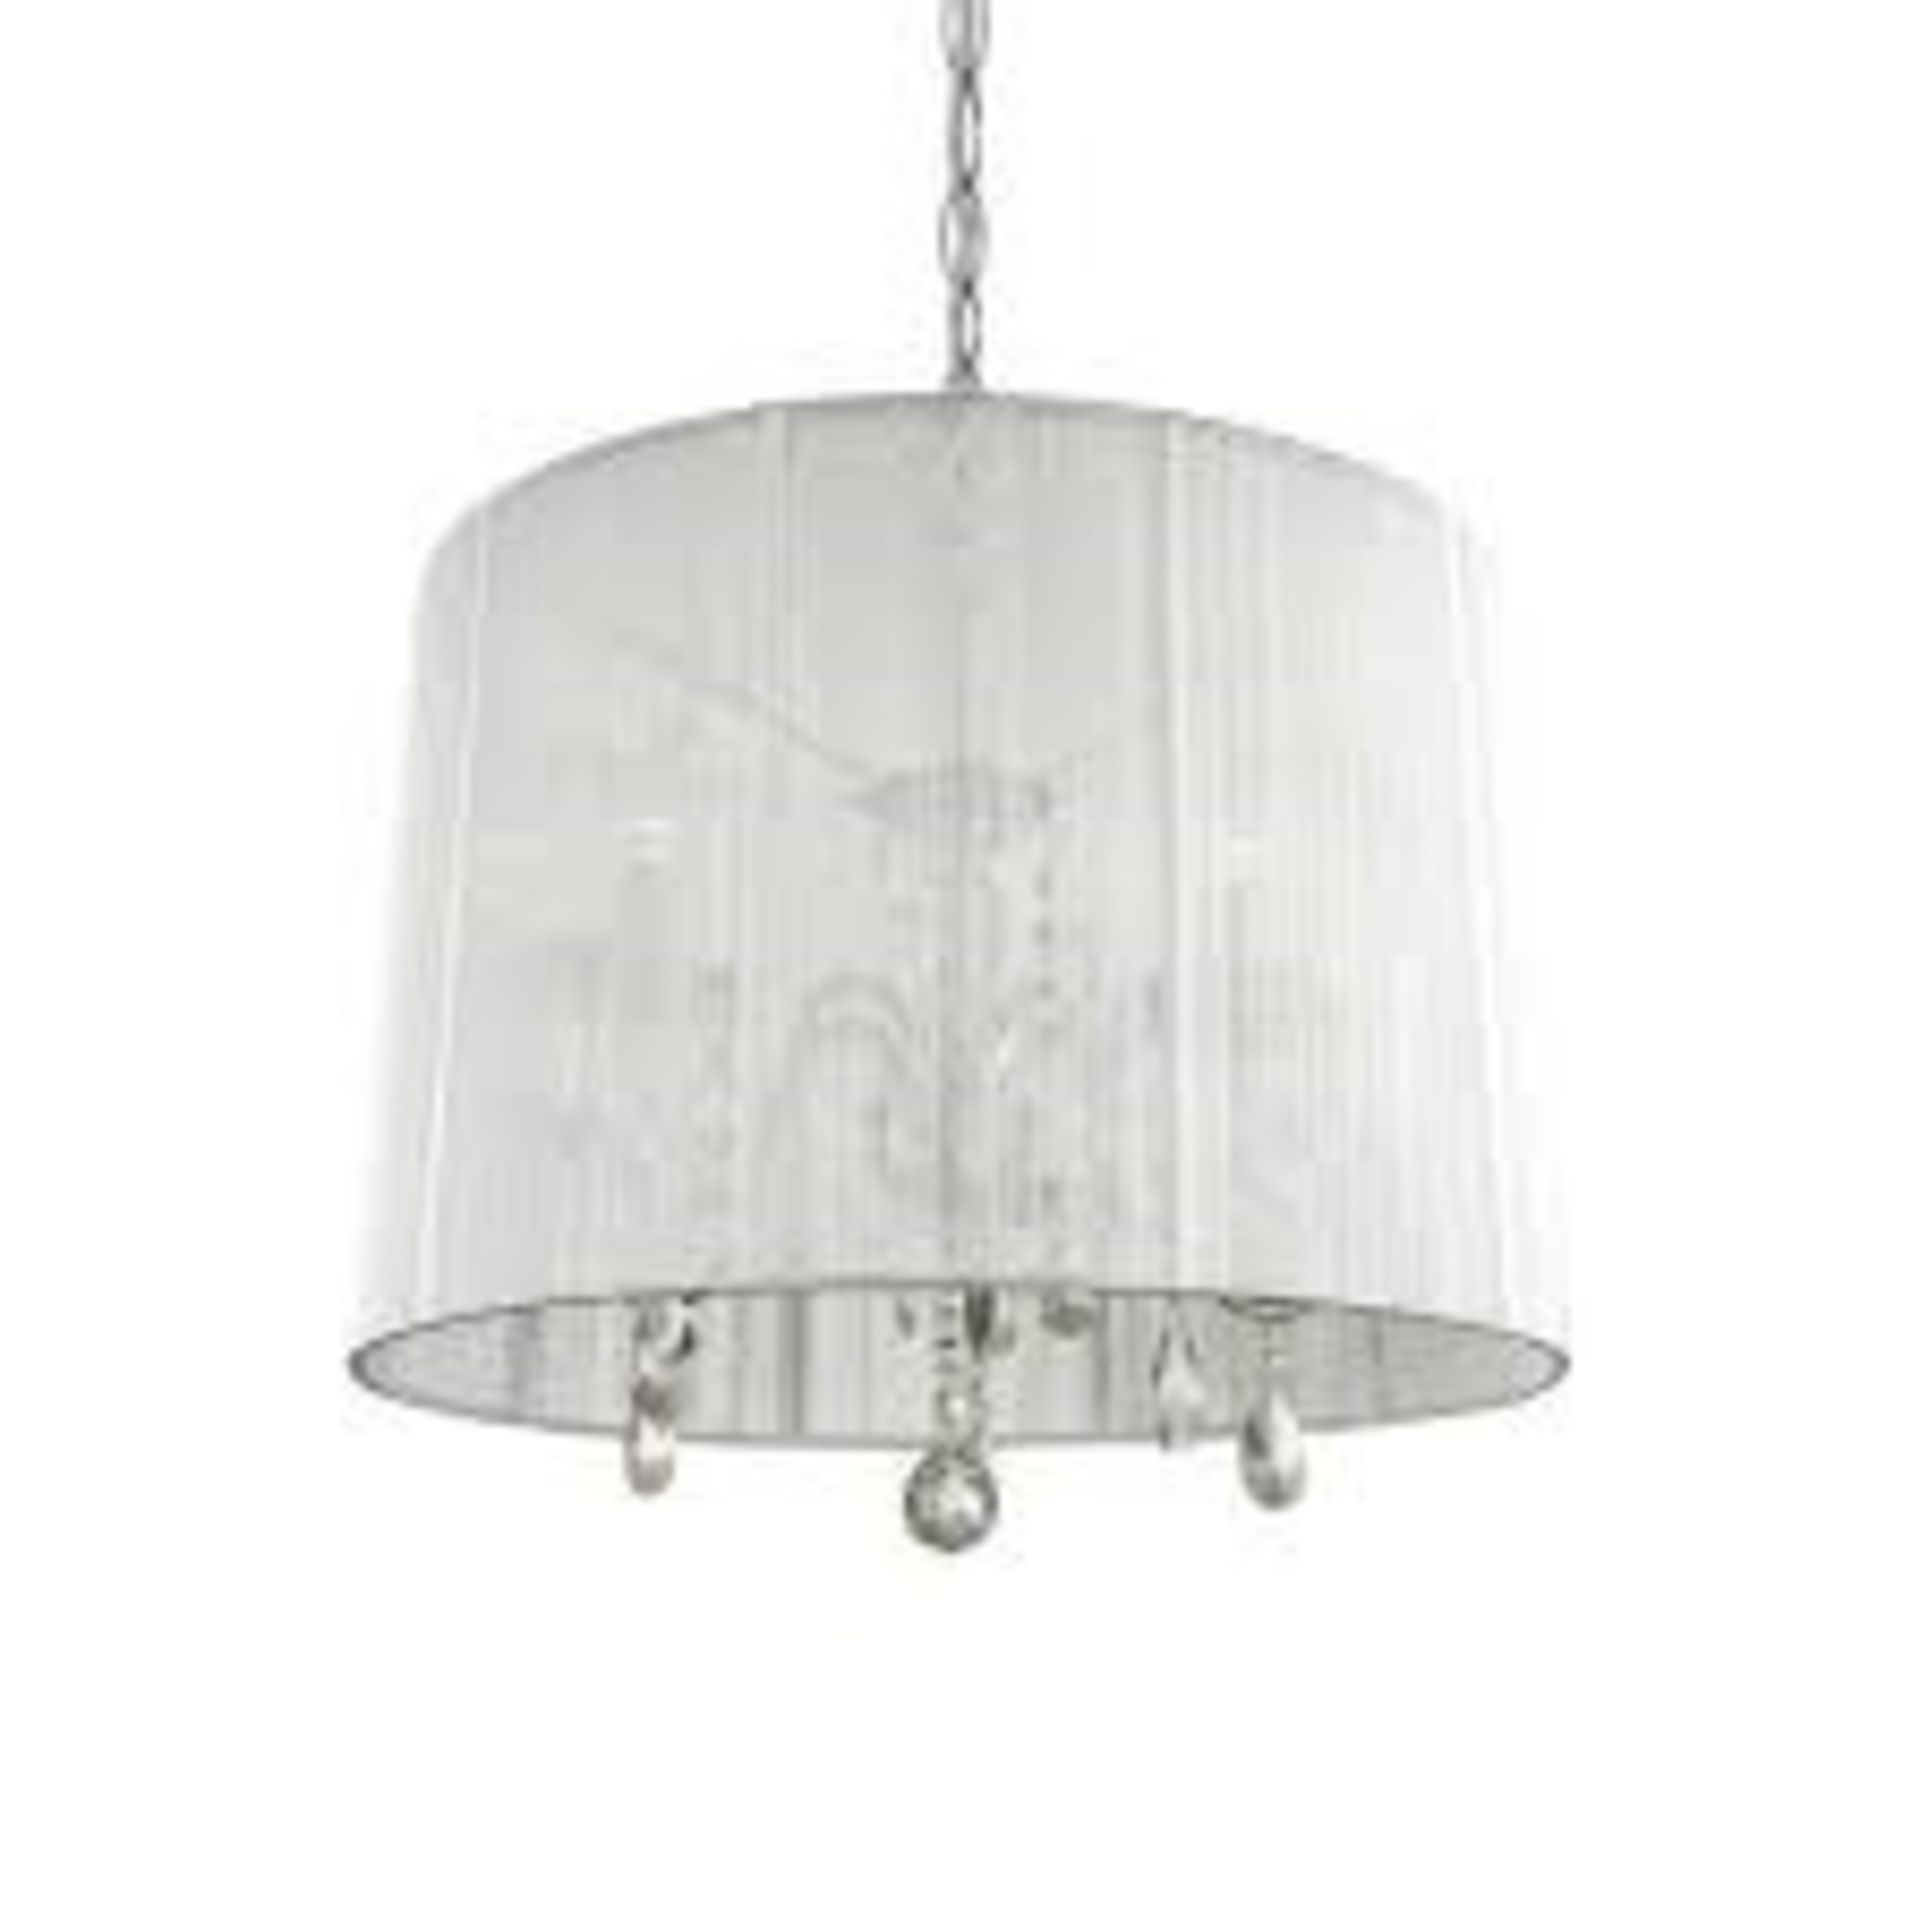 Boxed Luxury Lifestyle Collectione Merel 5 Light Grey Designer Ceiling Light RRP £140 (Public